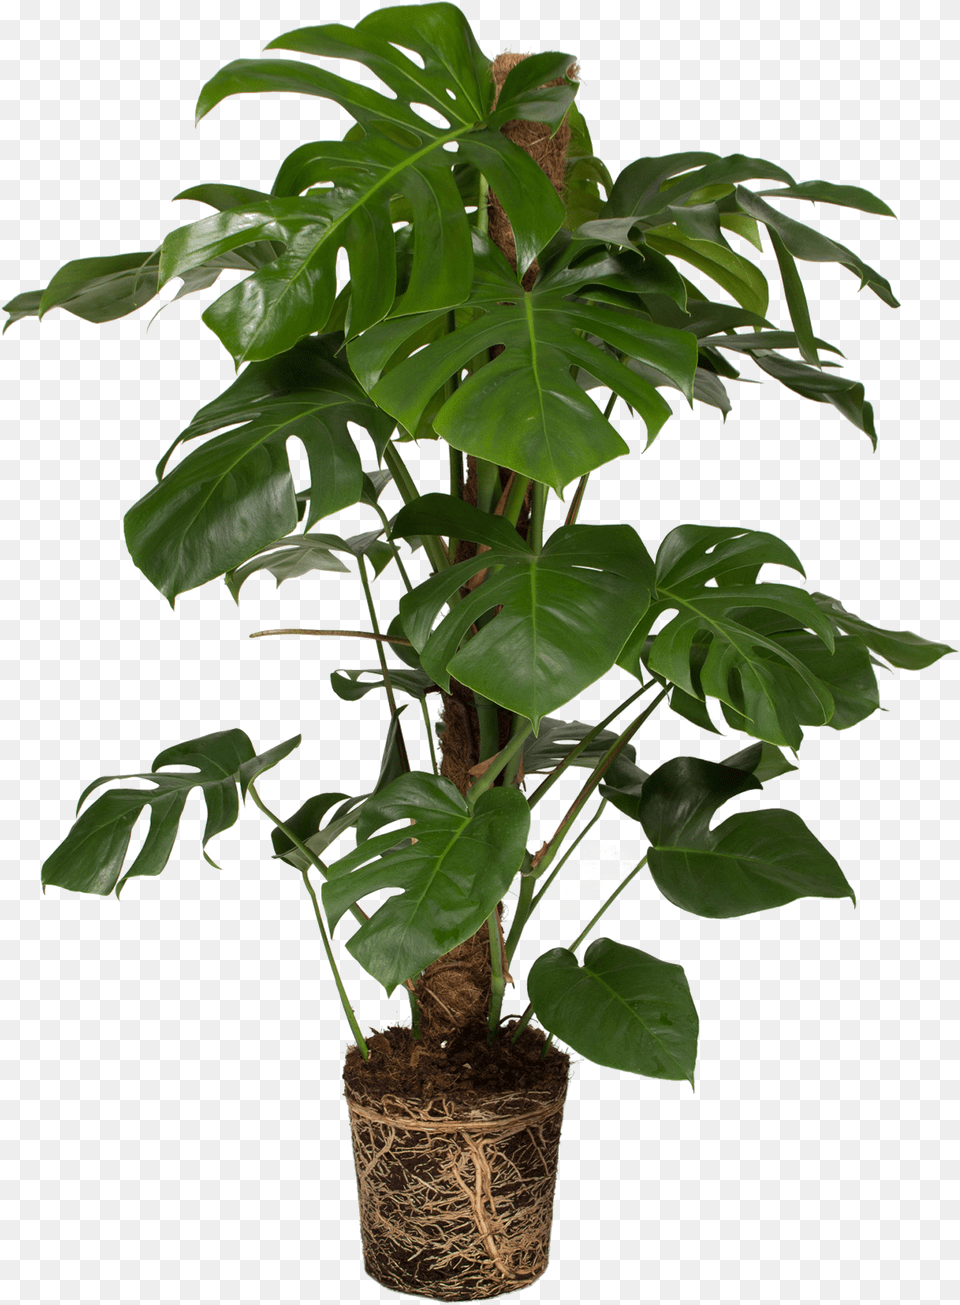 Swiss Cheese Plant Download Monstera Deliciosa, Flower, Leaf, Potted Plant, Tree Free Transparent Png